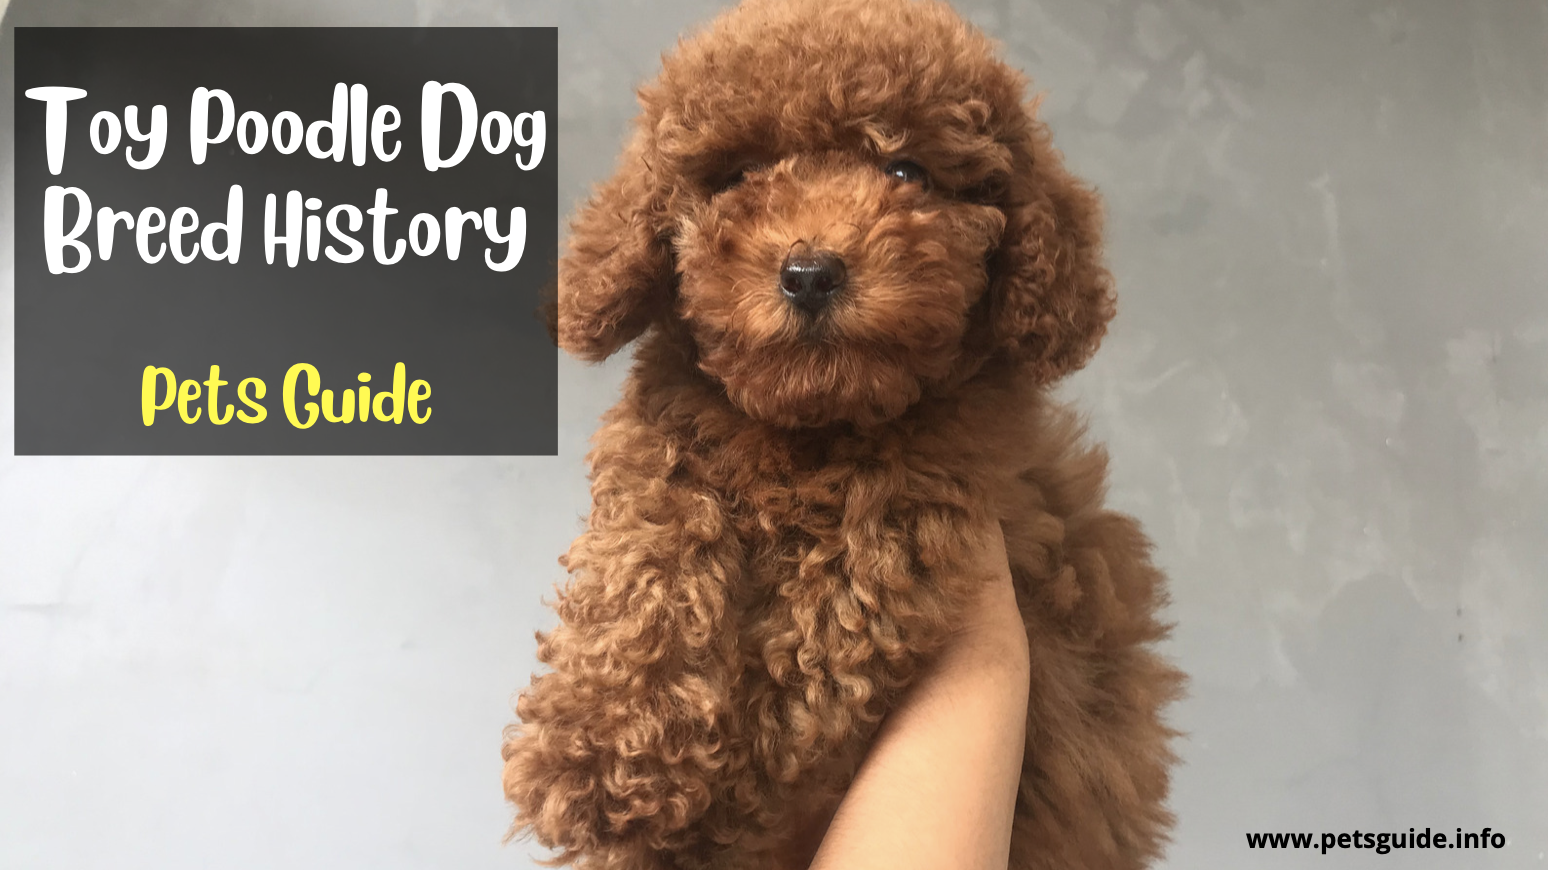 Top 9 Things to Know About Toy Poodle Dog Breed (Pets Guide)